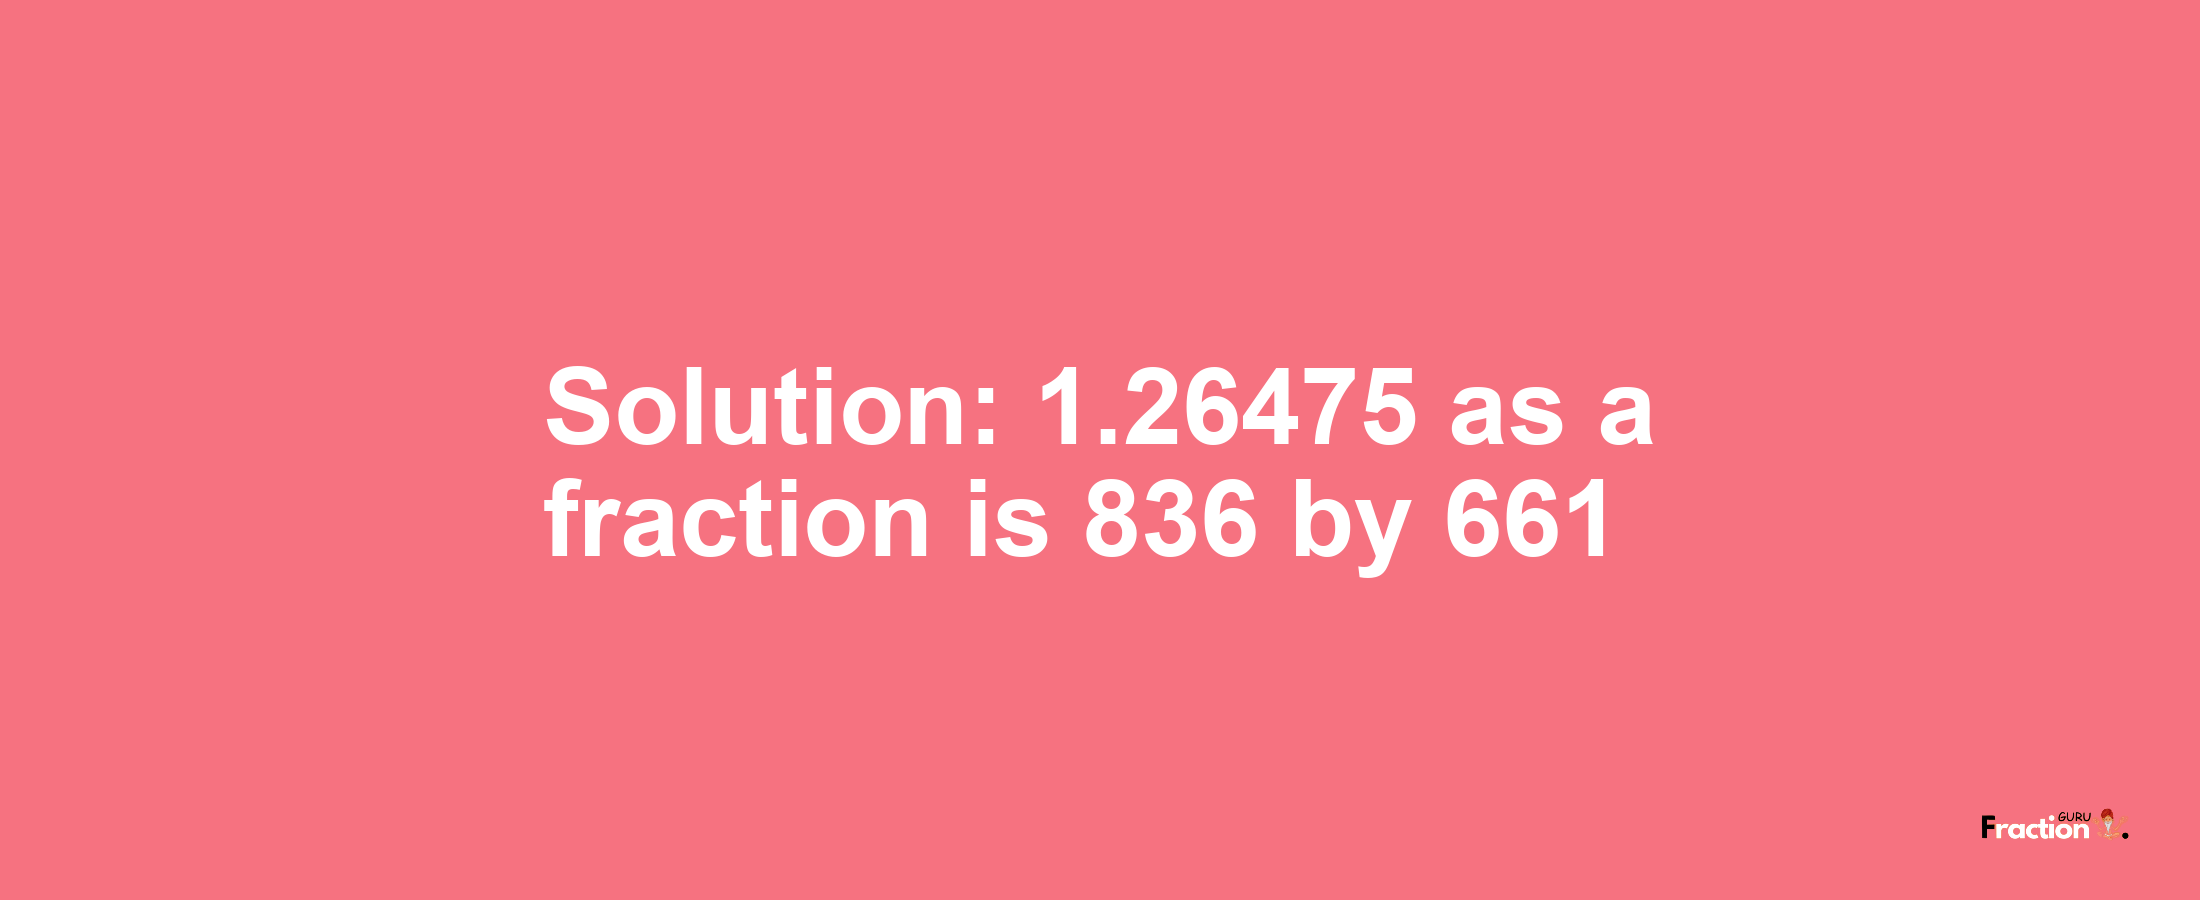 Solution:1.26475 as a fraction is 836/661